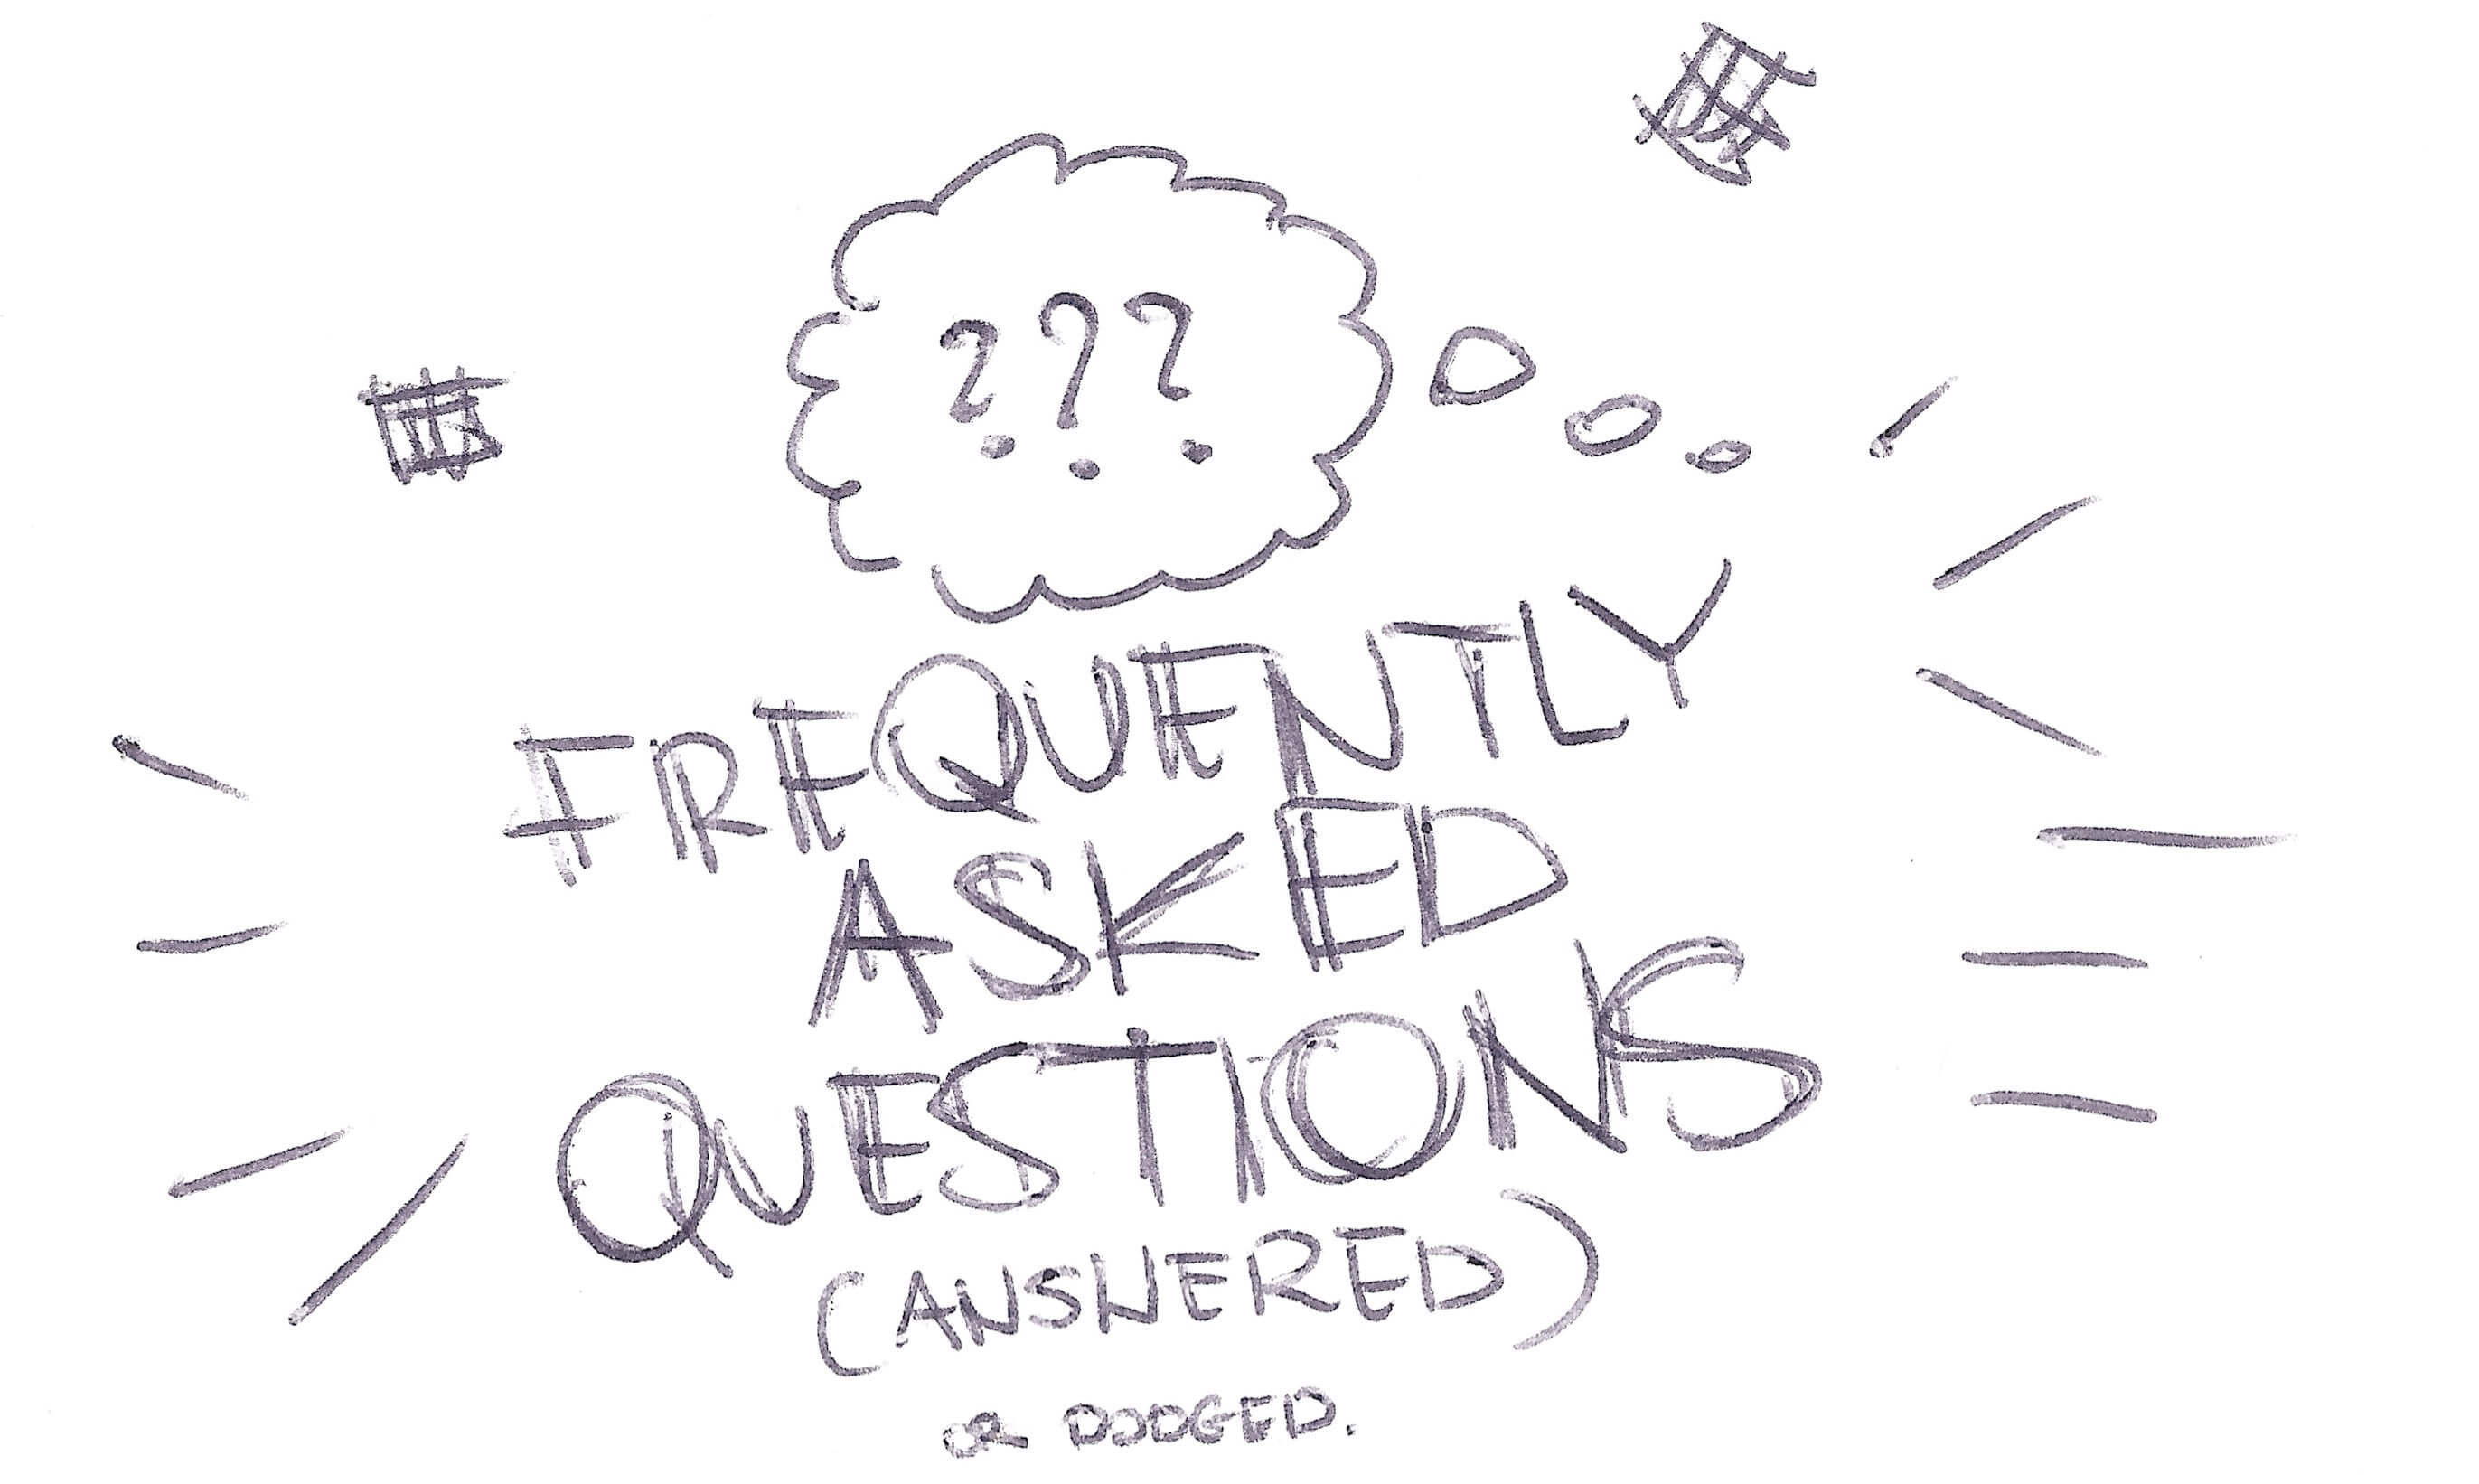 frequently asked questions, answered (or dodged)